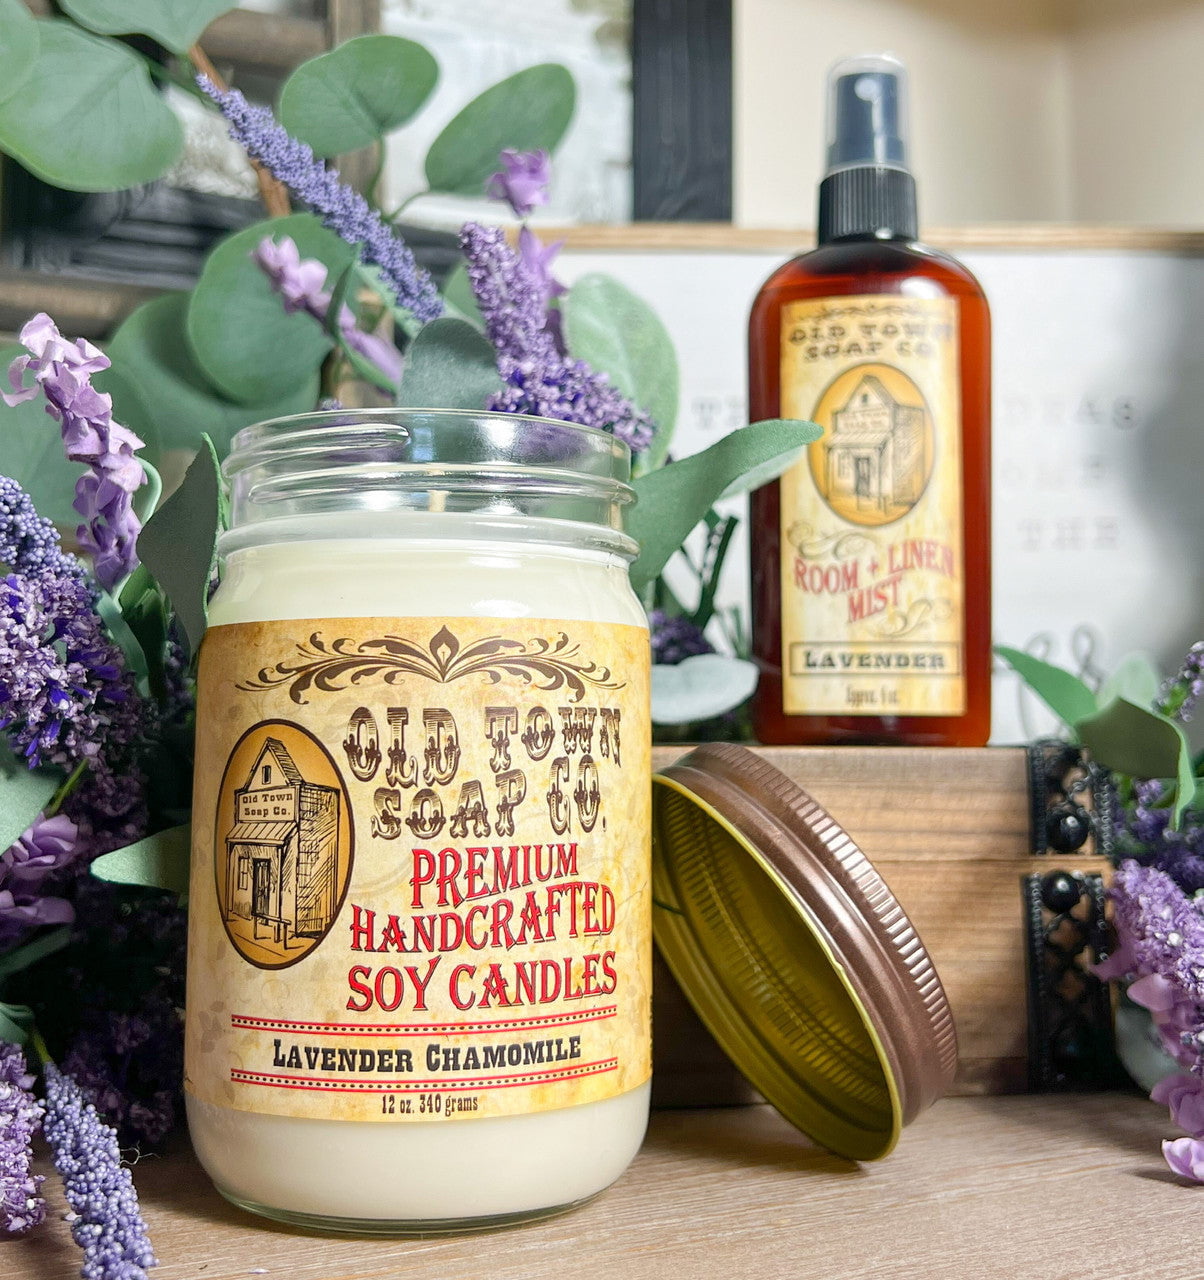 Oatmeal Milk And Honey - 12oz. Candles - Old Town Soap Co.